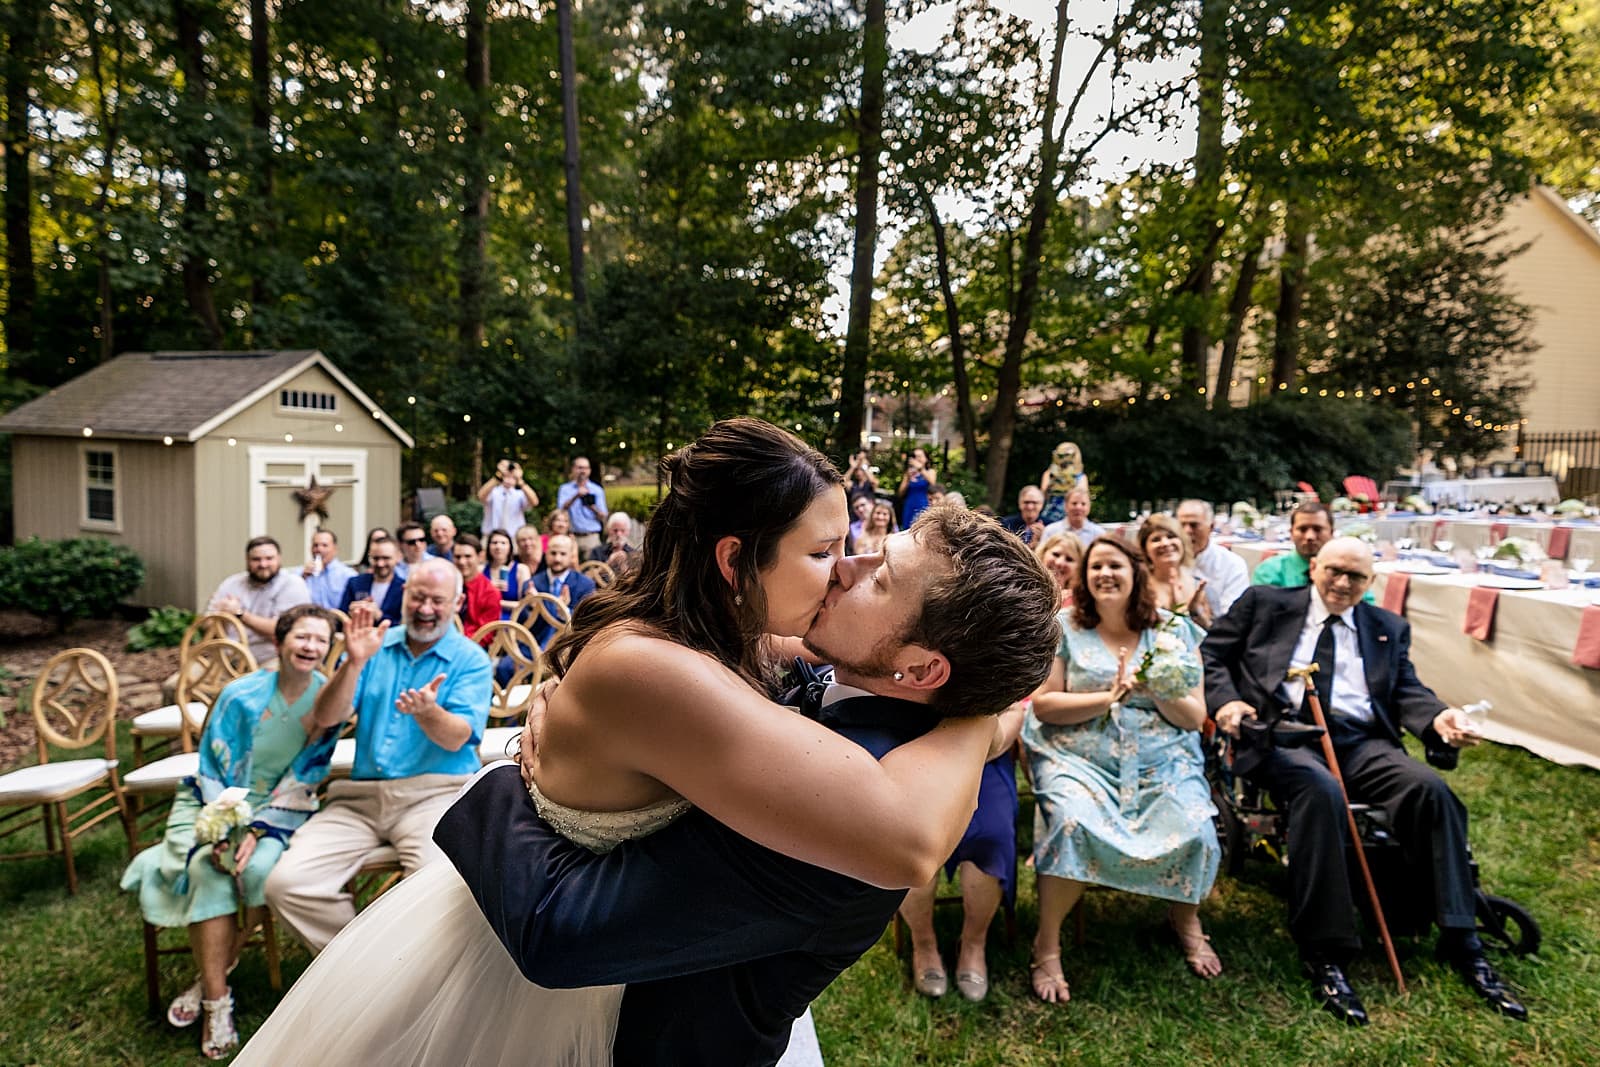 Ask your photographer to get this angle during your first kiss at your wedding